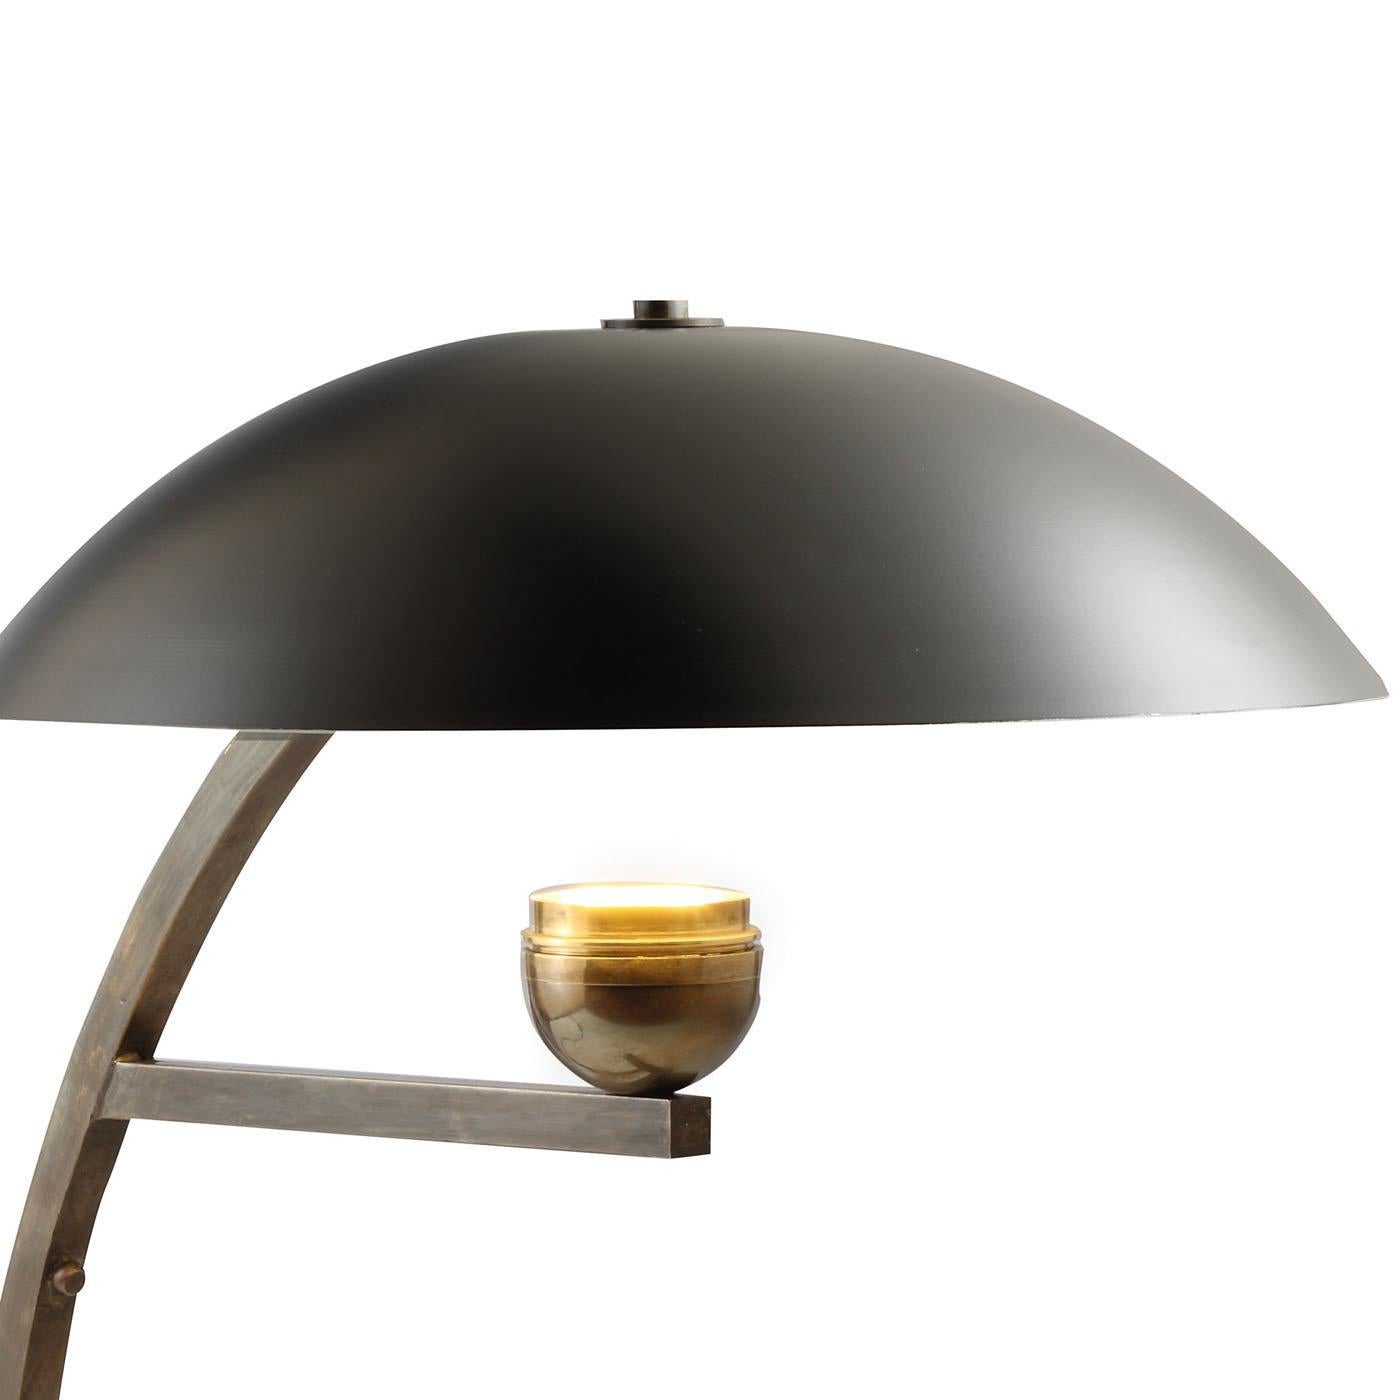 This striking lamp features a unique series of curved and straight elements in brass with a bronze finish that make up its structure. A short shelf in the center supports the light that shines upwards, shielded by the semi-spherical metal shade